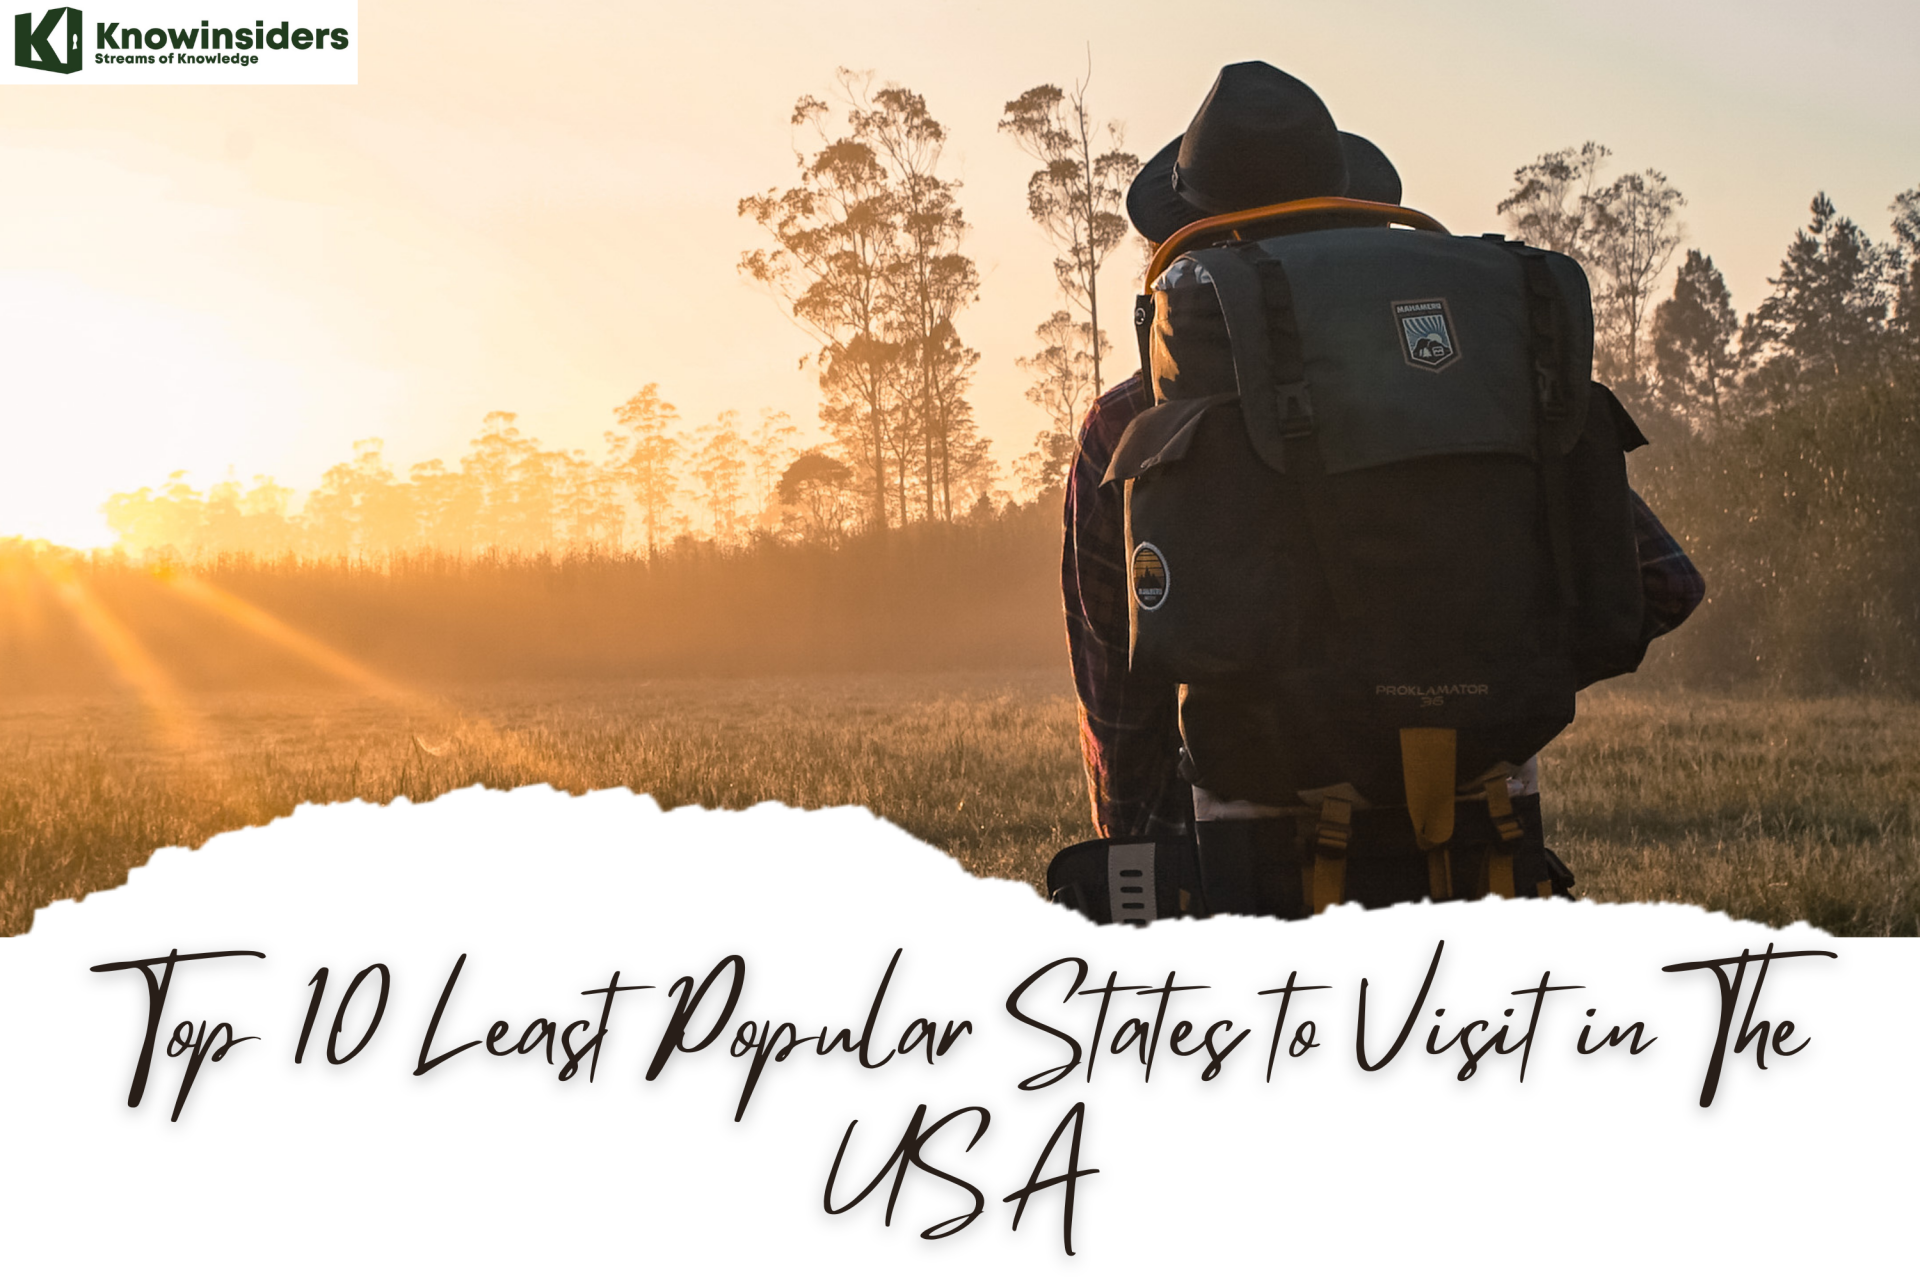 Top 10 Least Popular States That You Don't Want to Visit in USA